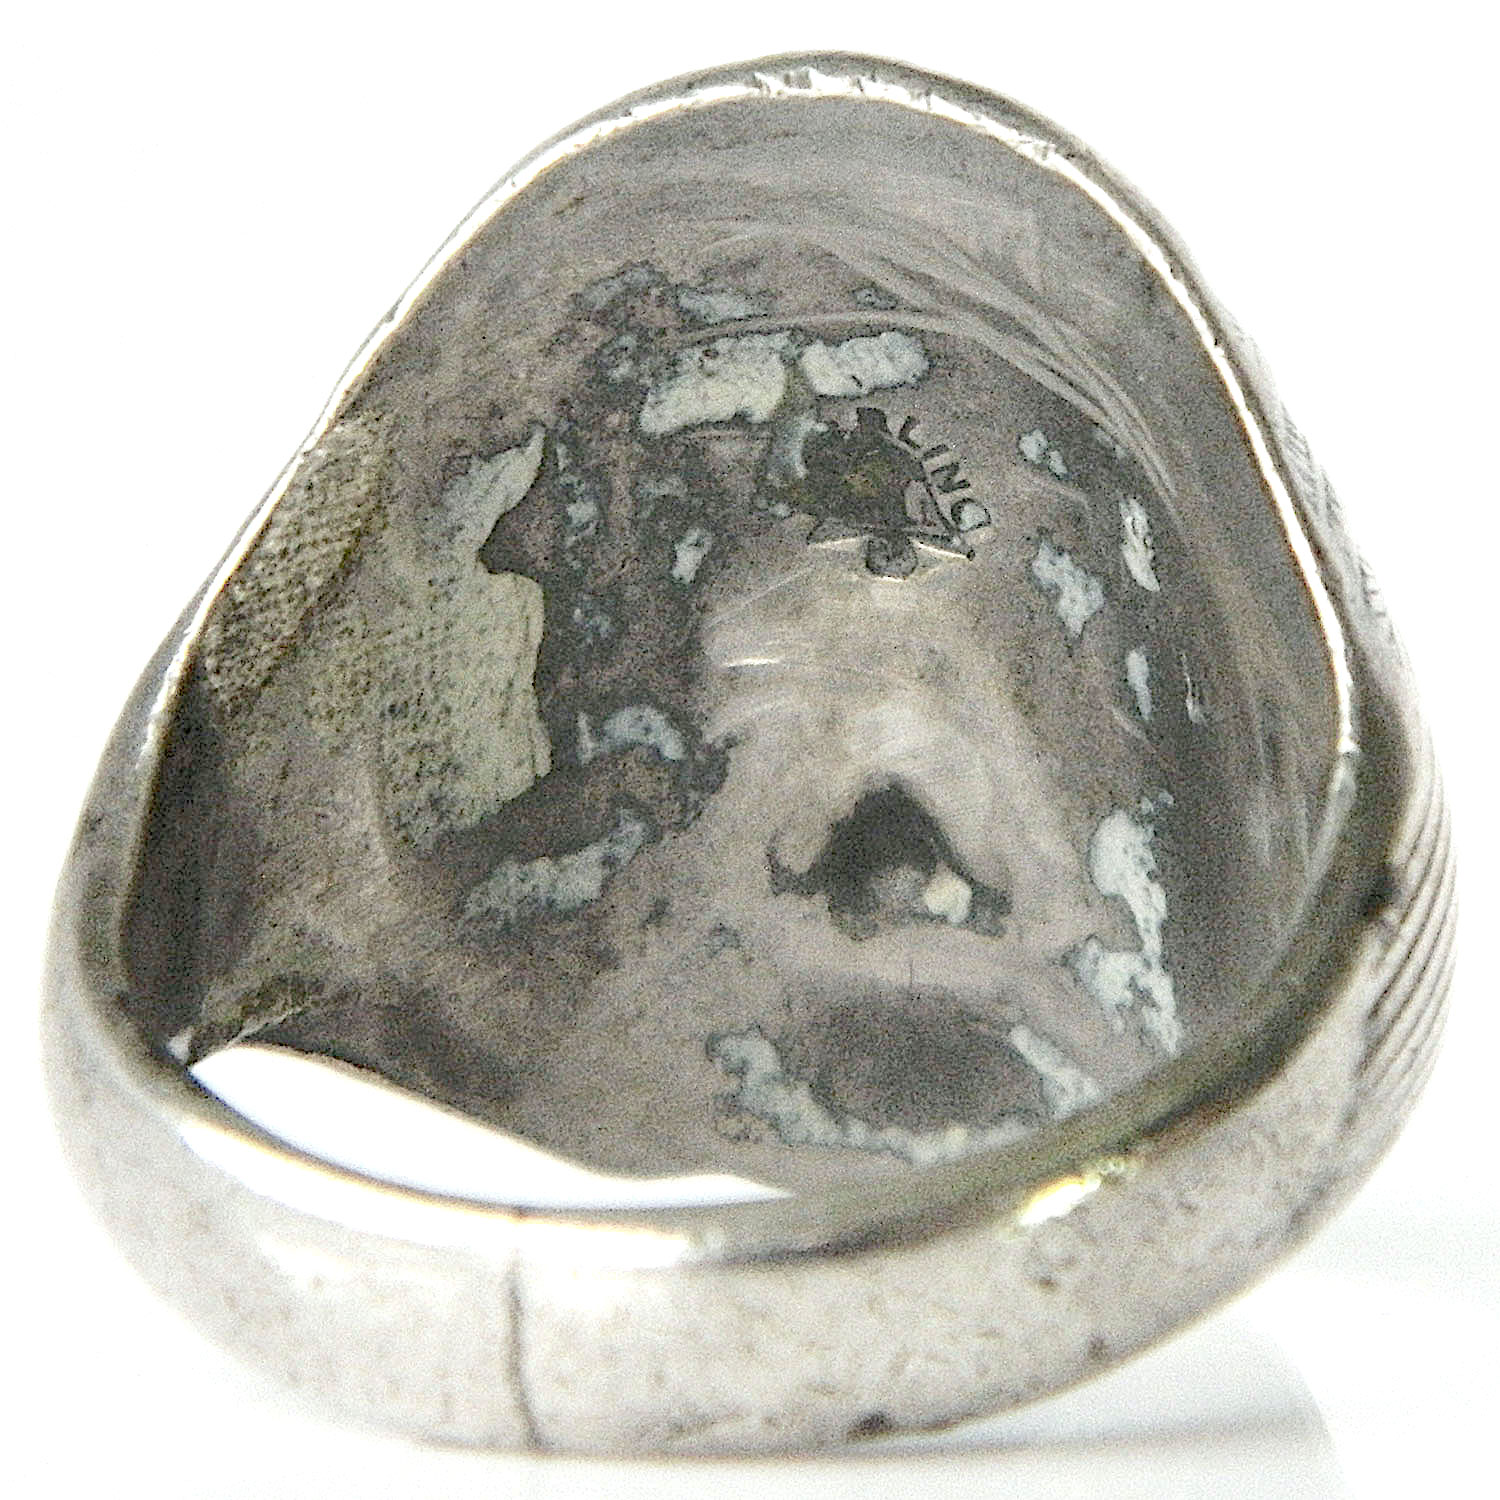 Bell Trading Post silver ring